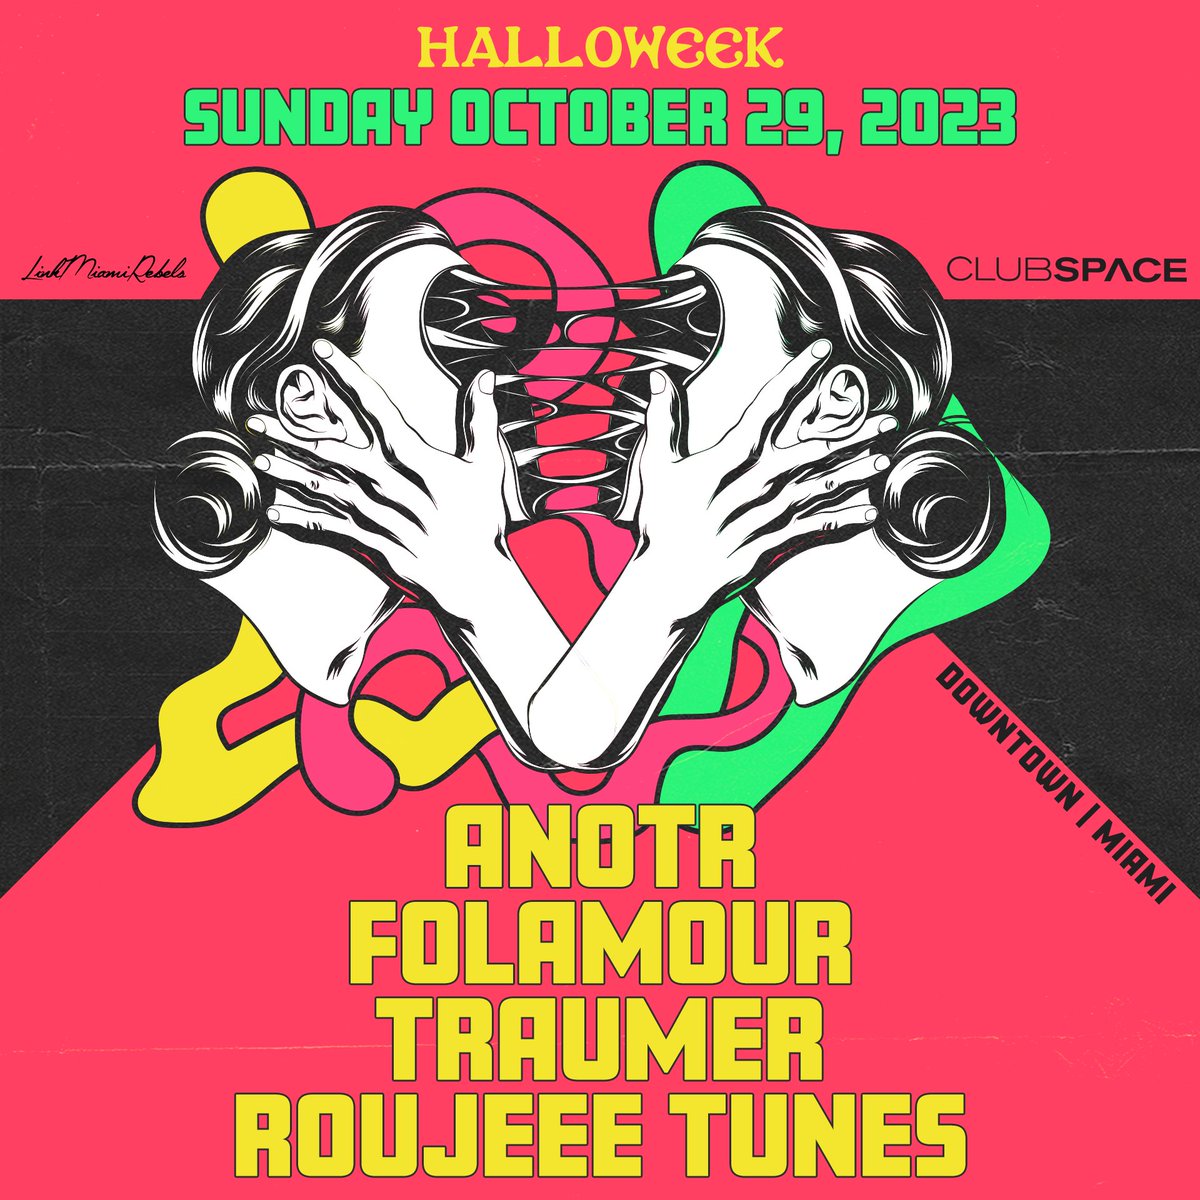 HALLOWEEK RETURNS TO MIAMI 🕸 Get ready for a jam-packed agenda all weekend long as we welcome @ANOTR + @folamourbb + @Traumer_music to take over the terrace on Sunday, October 29th 👻 ON SALE NOW! #LinkMiamiRebels TIX ⬇️⬇️⬇️ link.dice.fm/spaceoct29